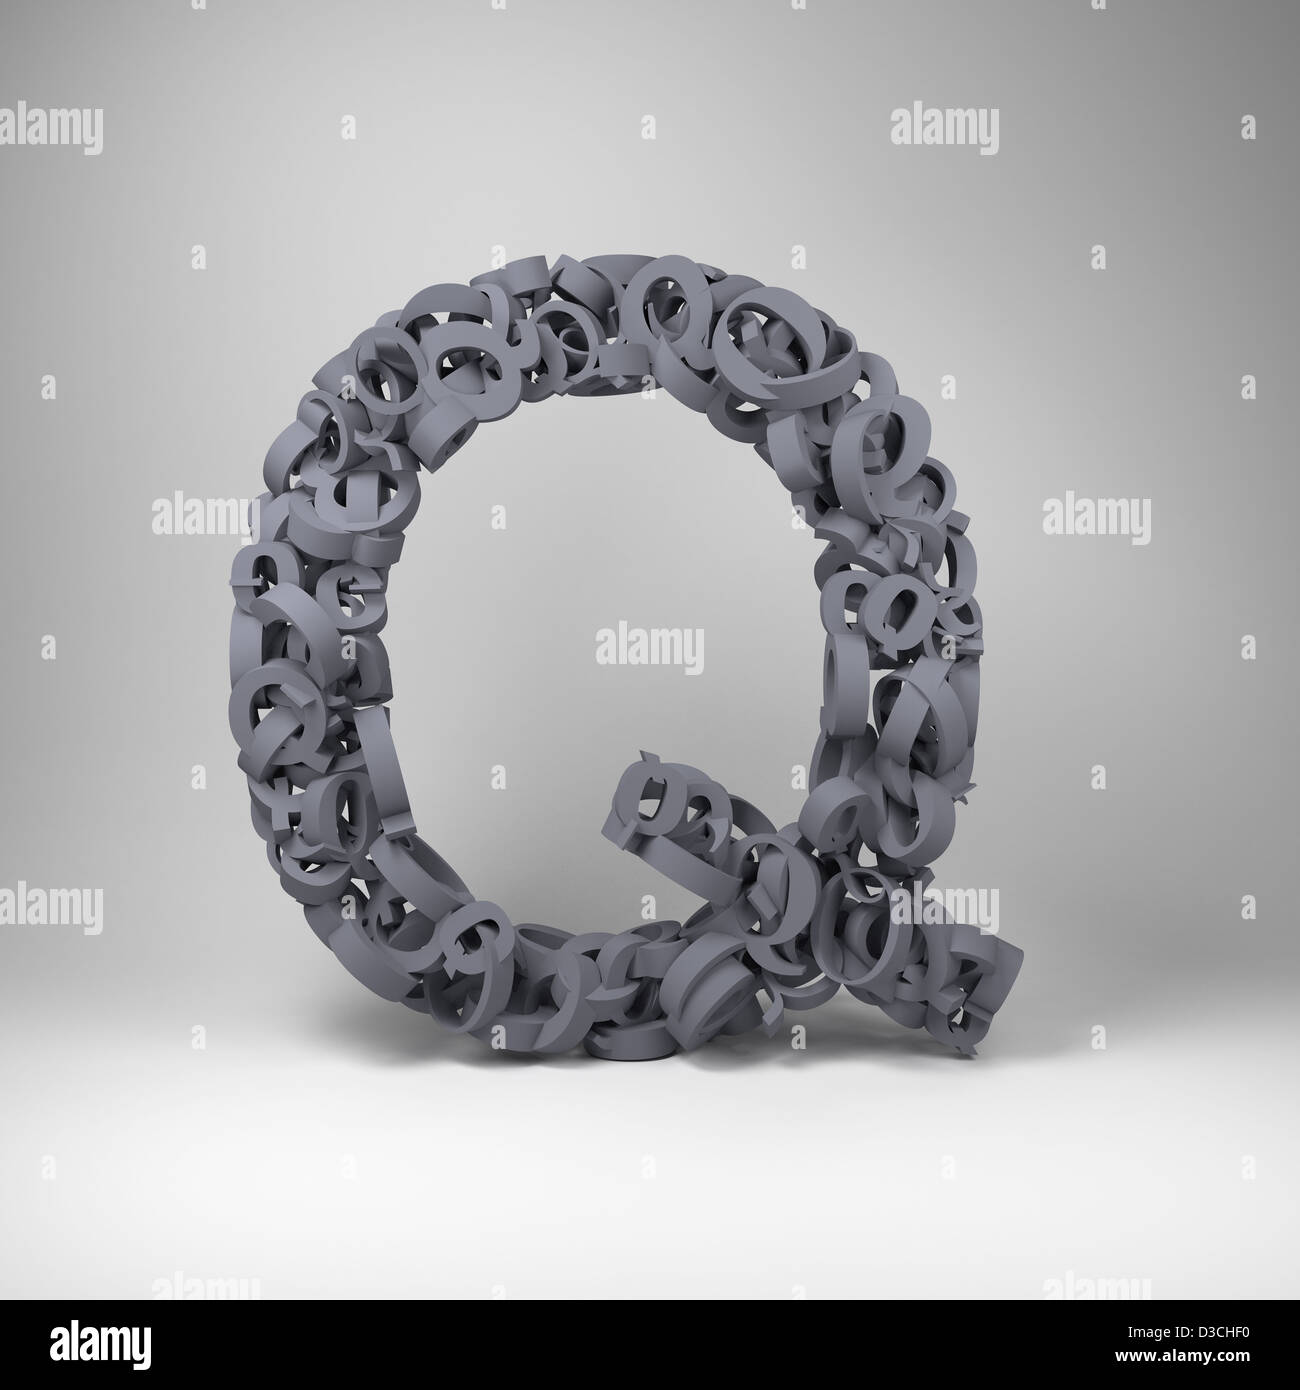 Letter Q made out of scrambled small letters in studio setting Stock Photo